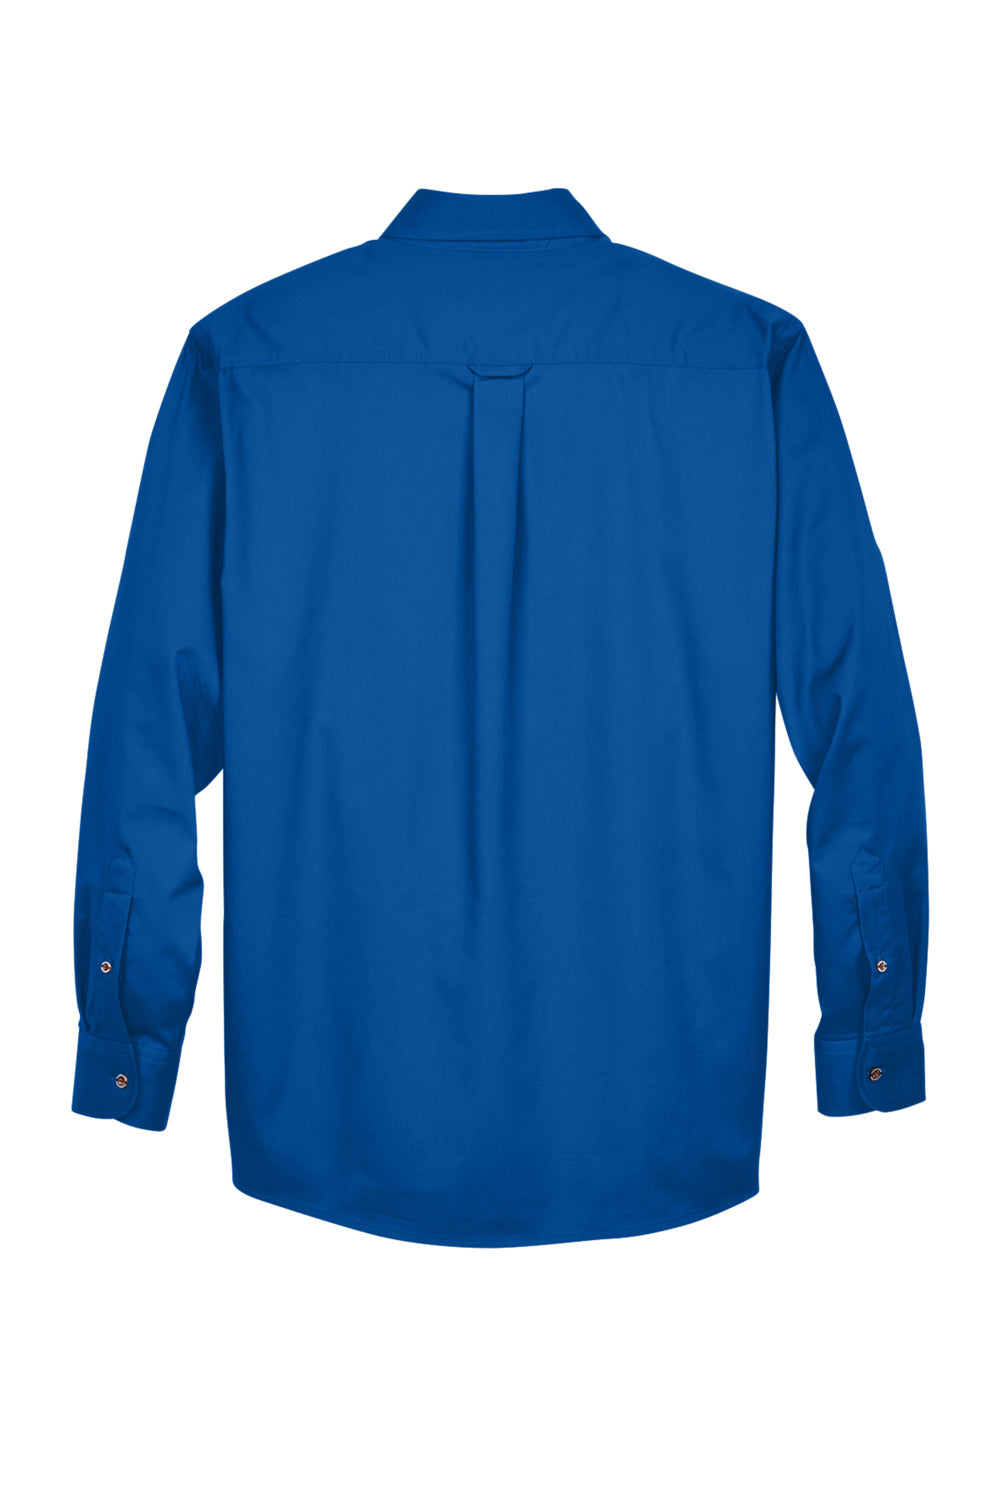 Harriton M500/M500T Wrinkle Resistant Long Sleeve Button Down Shirt w/ Pocket French Blue Flat Back